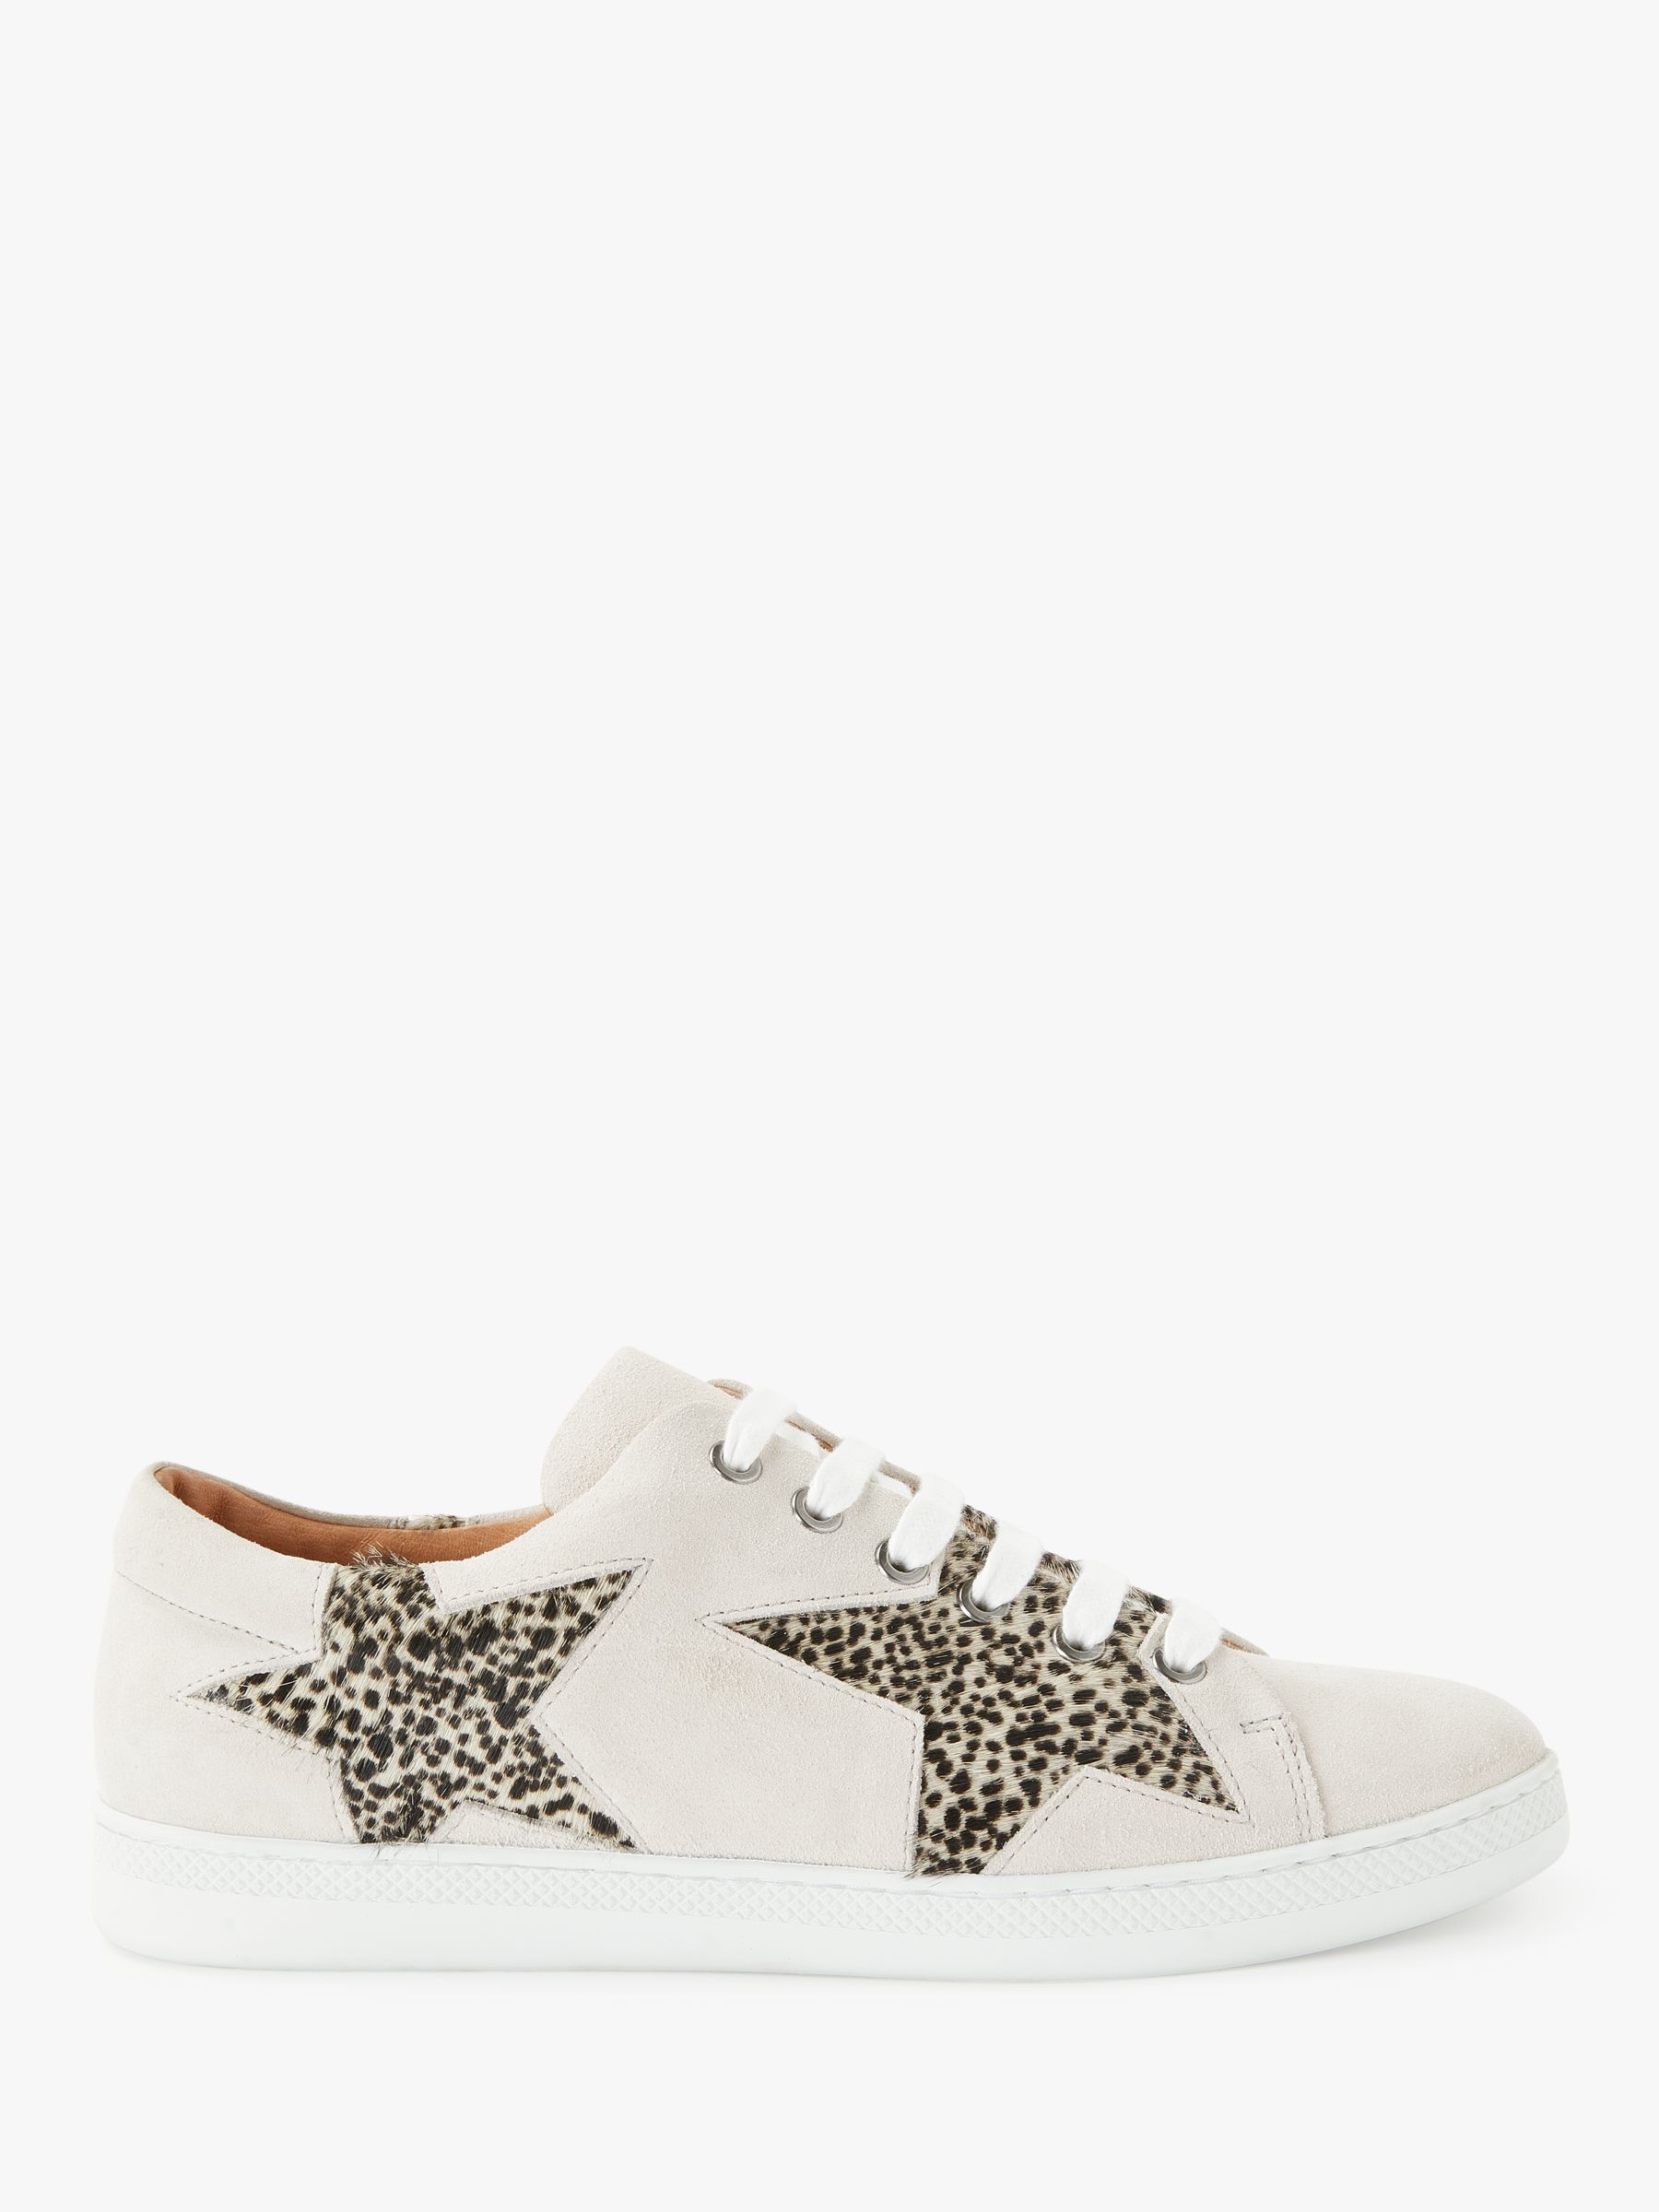 AND/OR Edie Star Trainers, White Suede/Pony